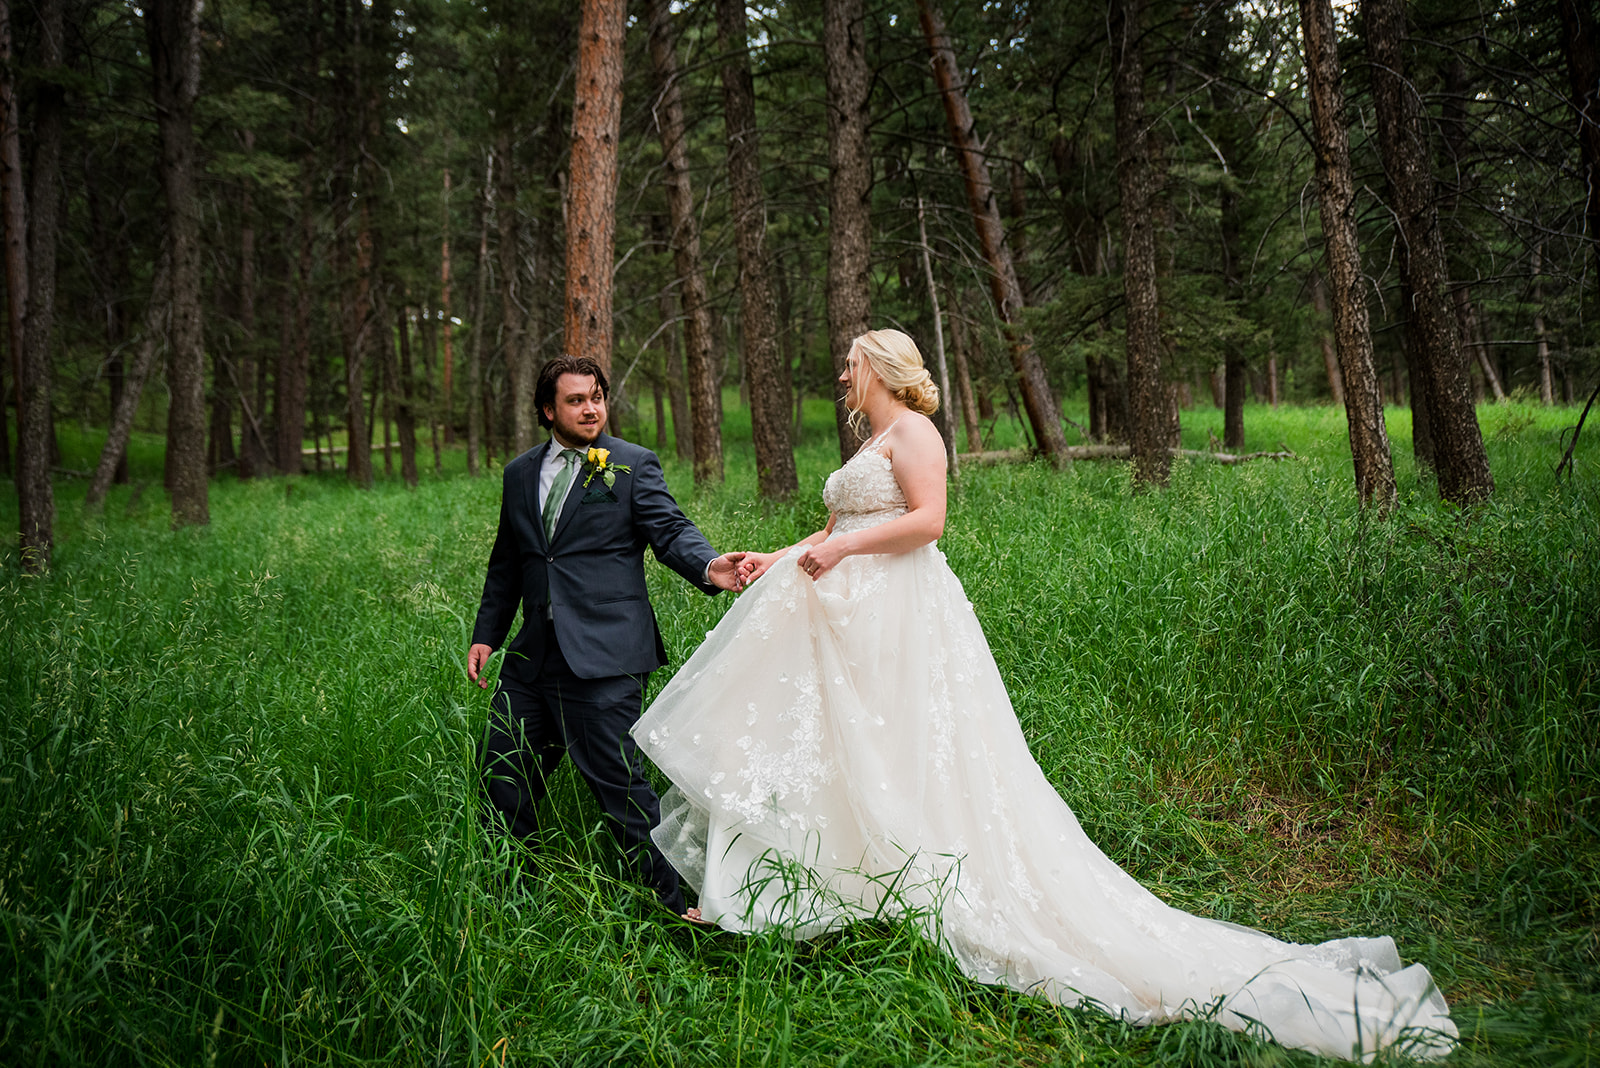 The groom leads the bride as they walk through a grassy field.